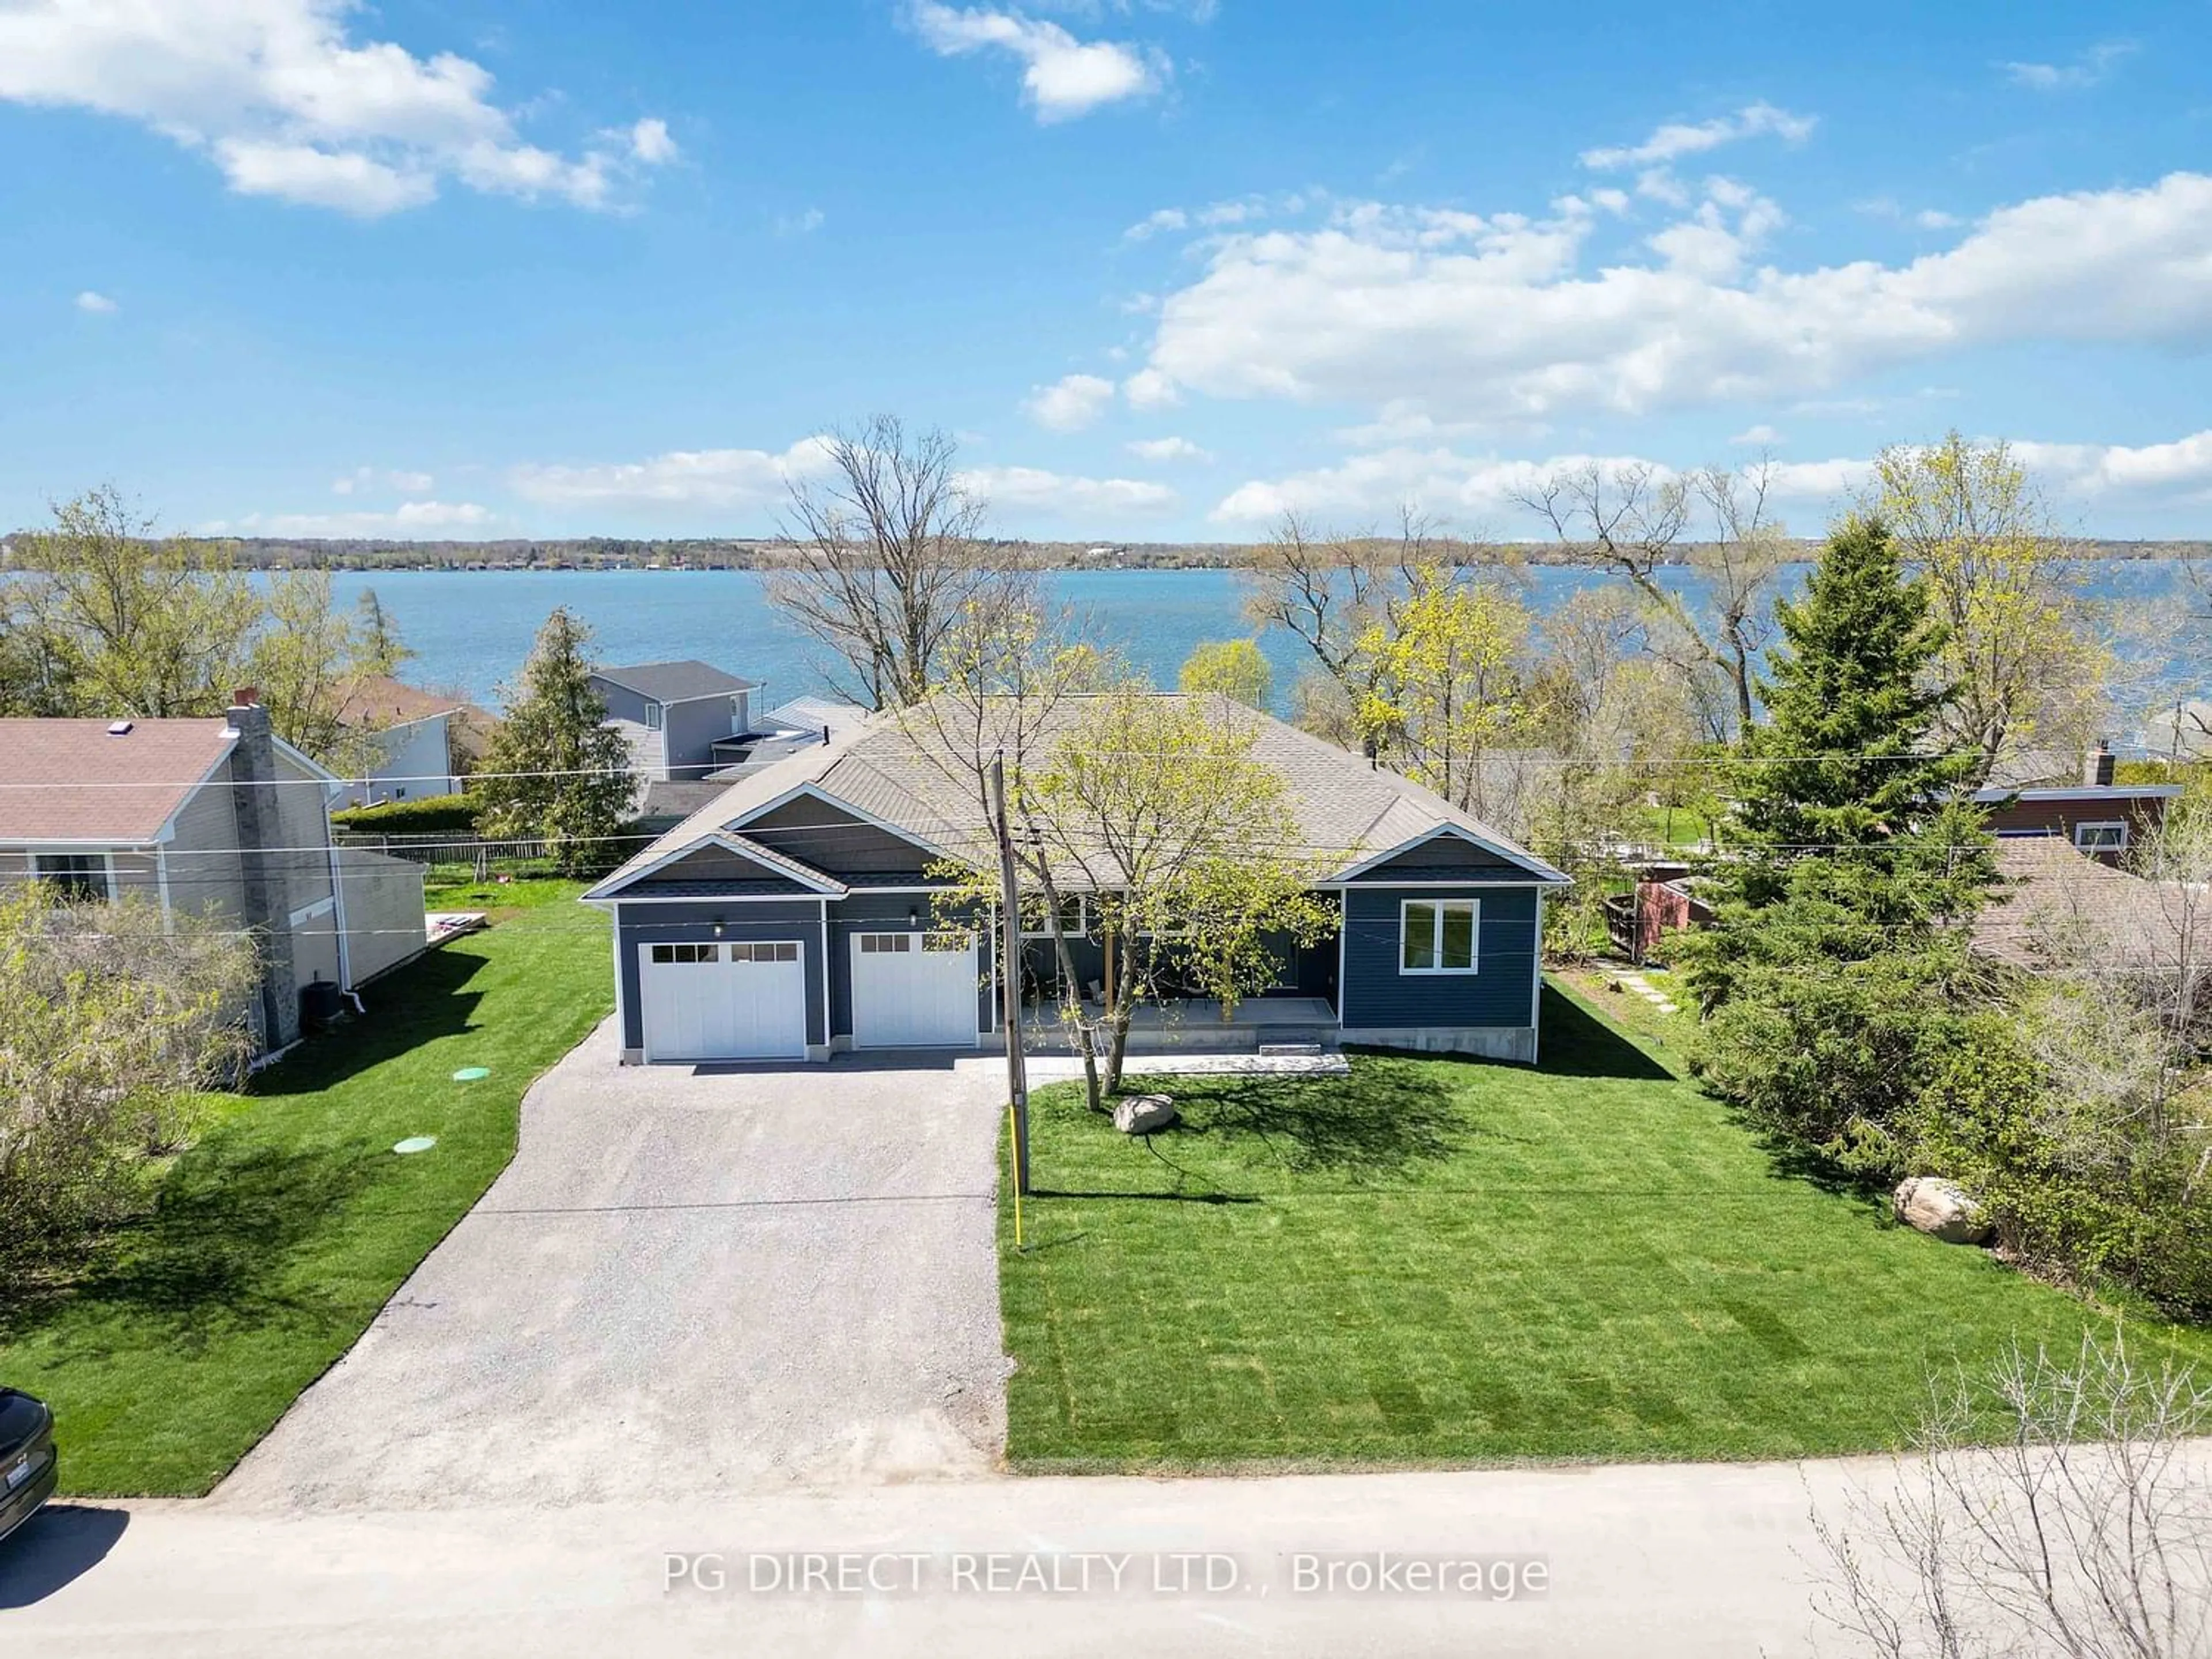 Lakeview for 16 Summit Dr, Scugog Ontario L0B 1E0